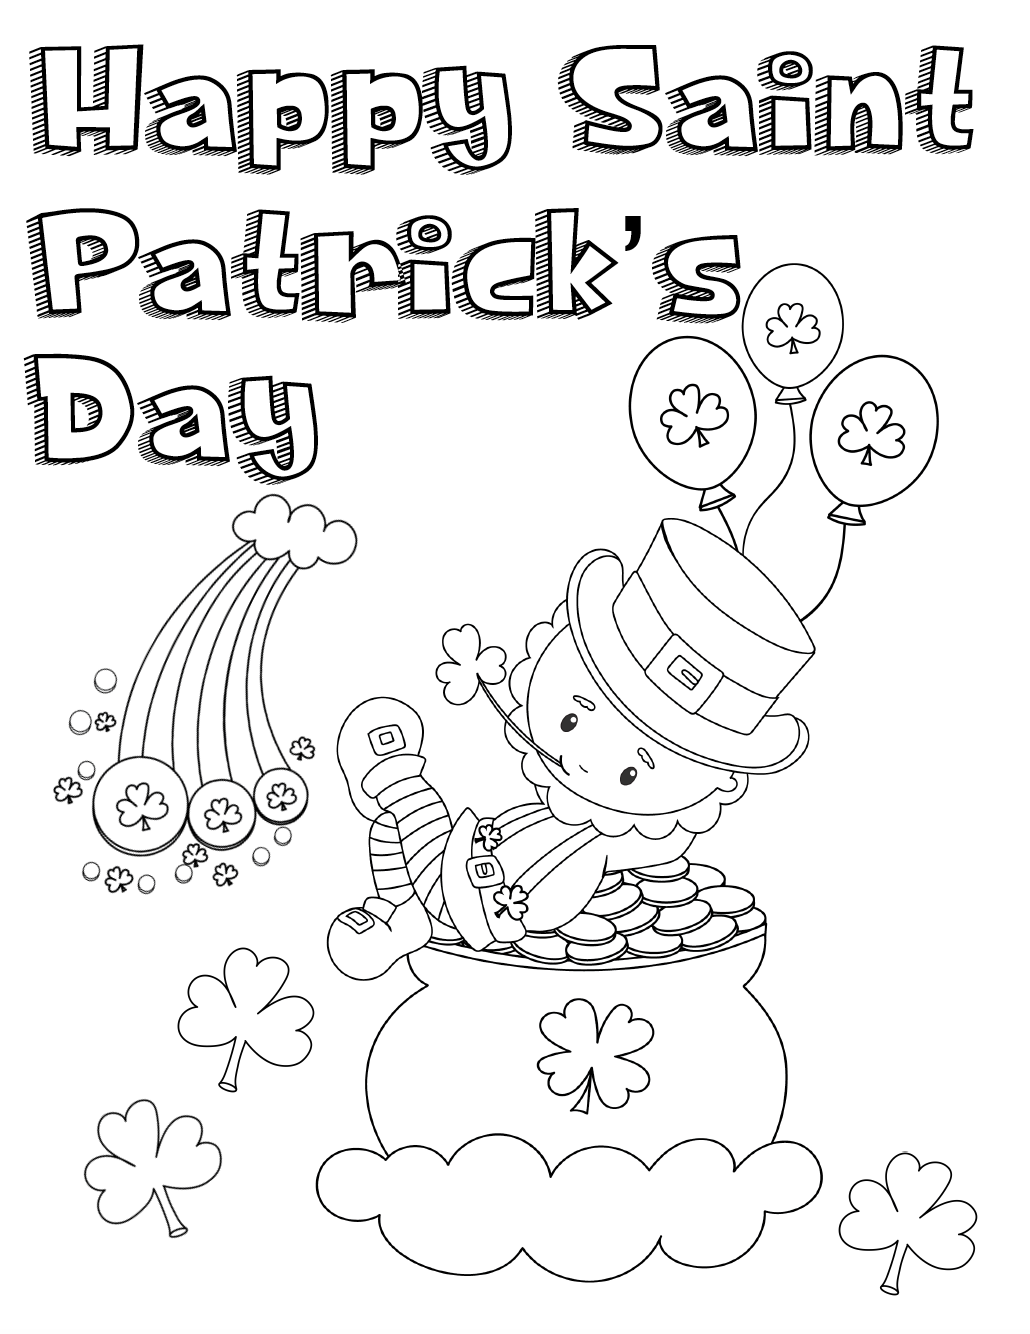 Download Free Printable St. Patrick's Day Coloring Pages: 4 Designs!